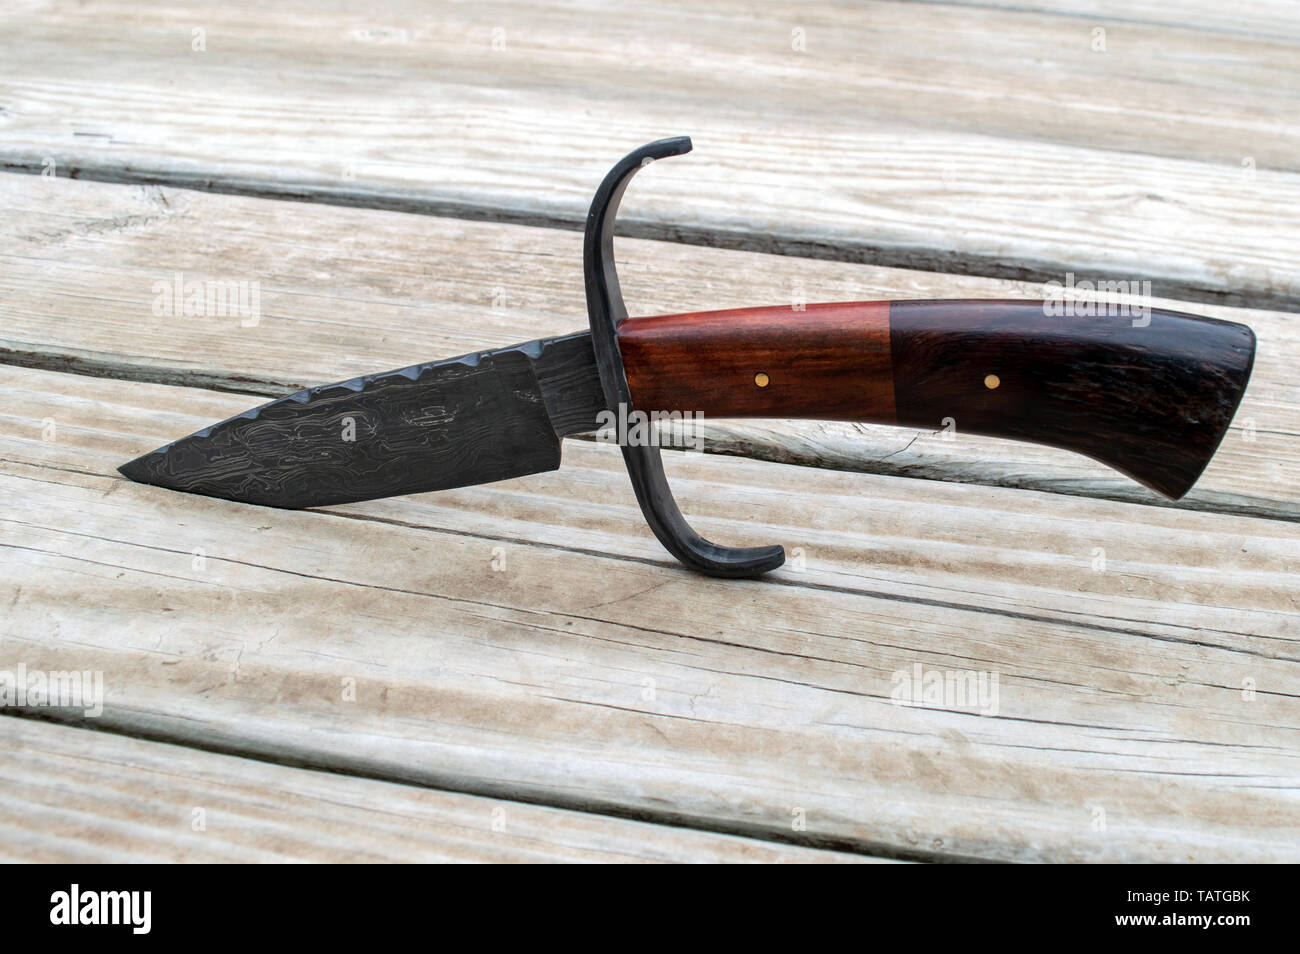 With a bokeh background, this unique bowie knife makes a nice portrait displayed on a wooden deck in Southwest Missouri. Stock Photo